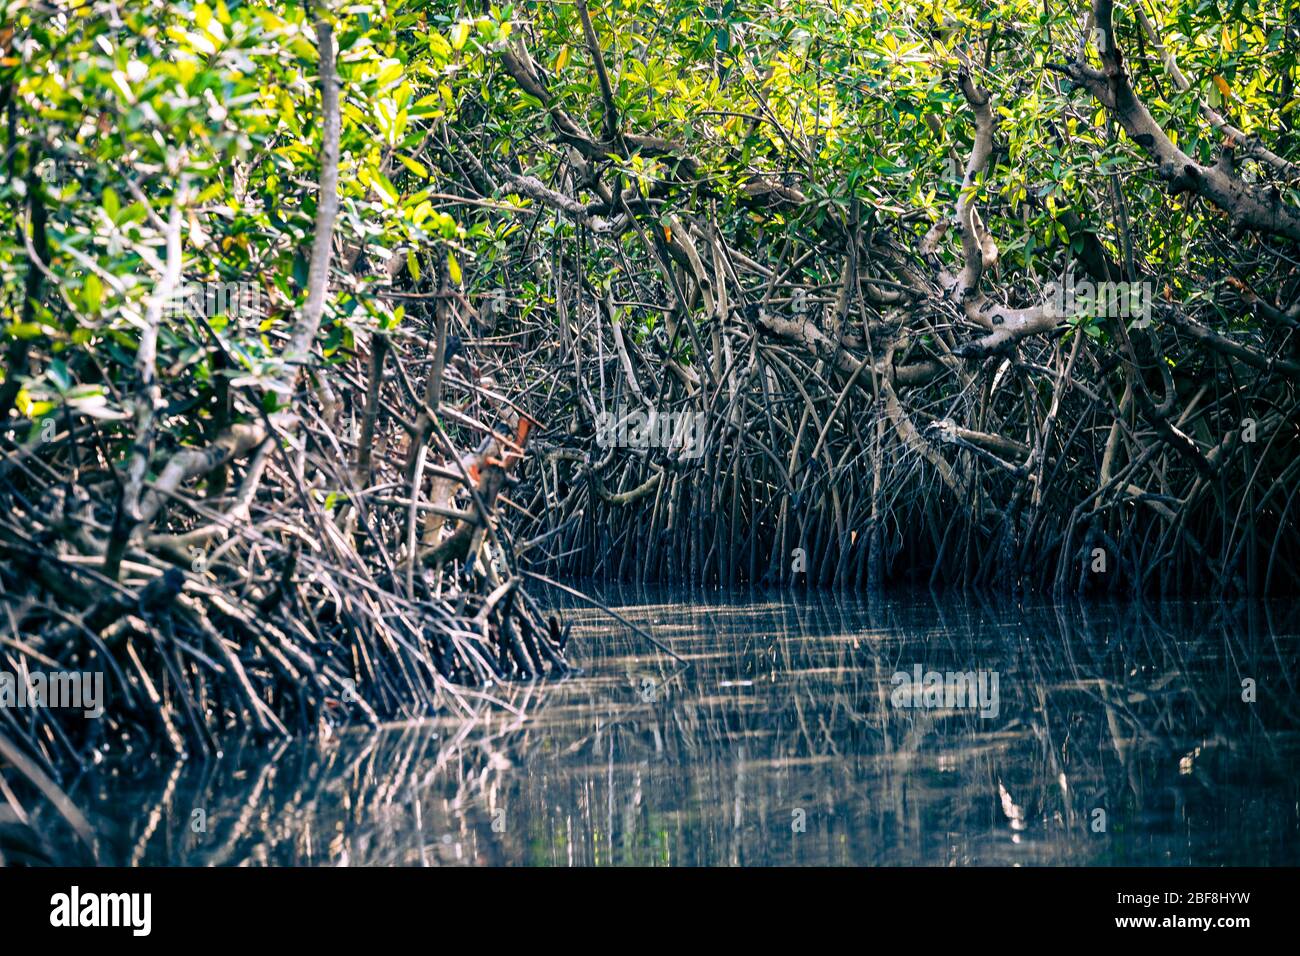 Gambia Mangroves. Kayaking in green mangrove forest in Gambia. Africa Natural Landscape. Stock Photo